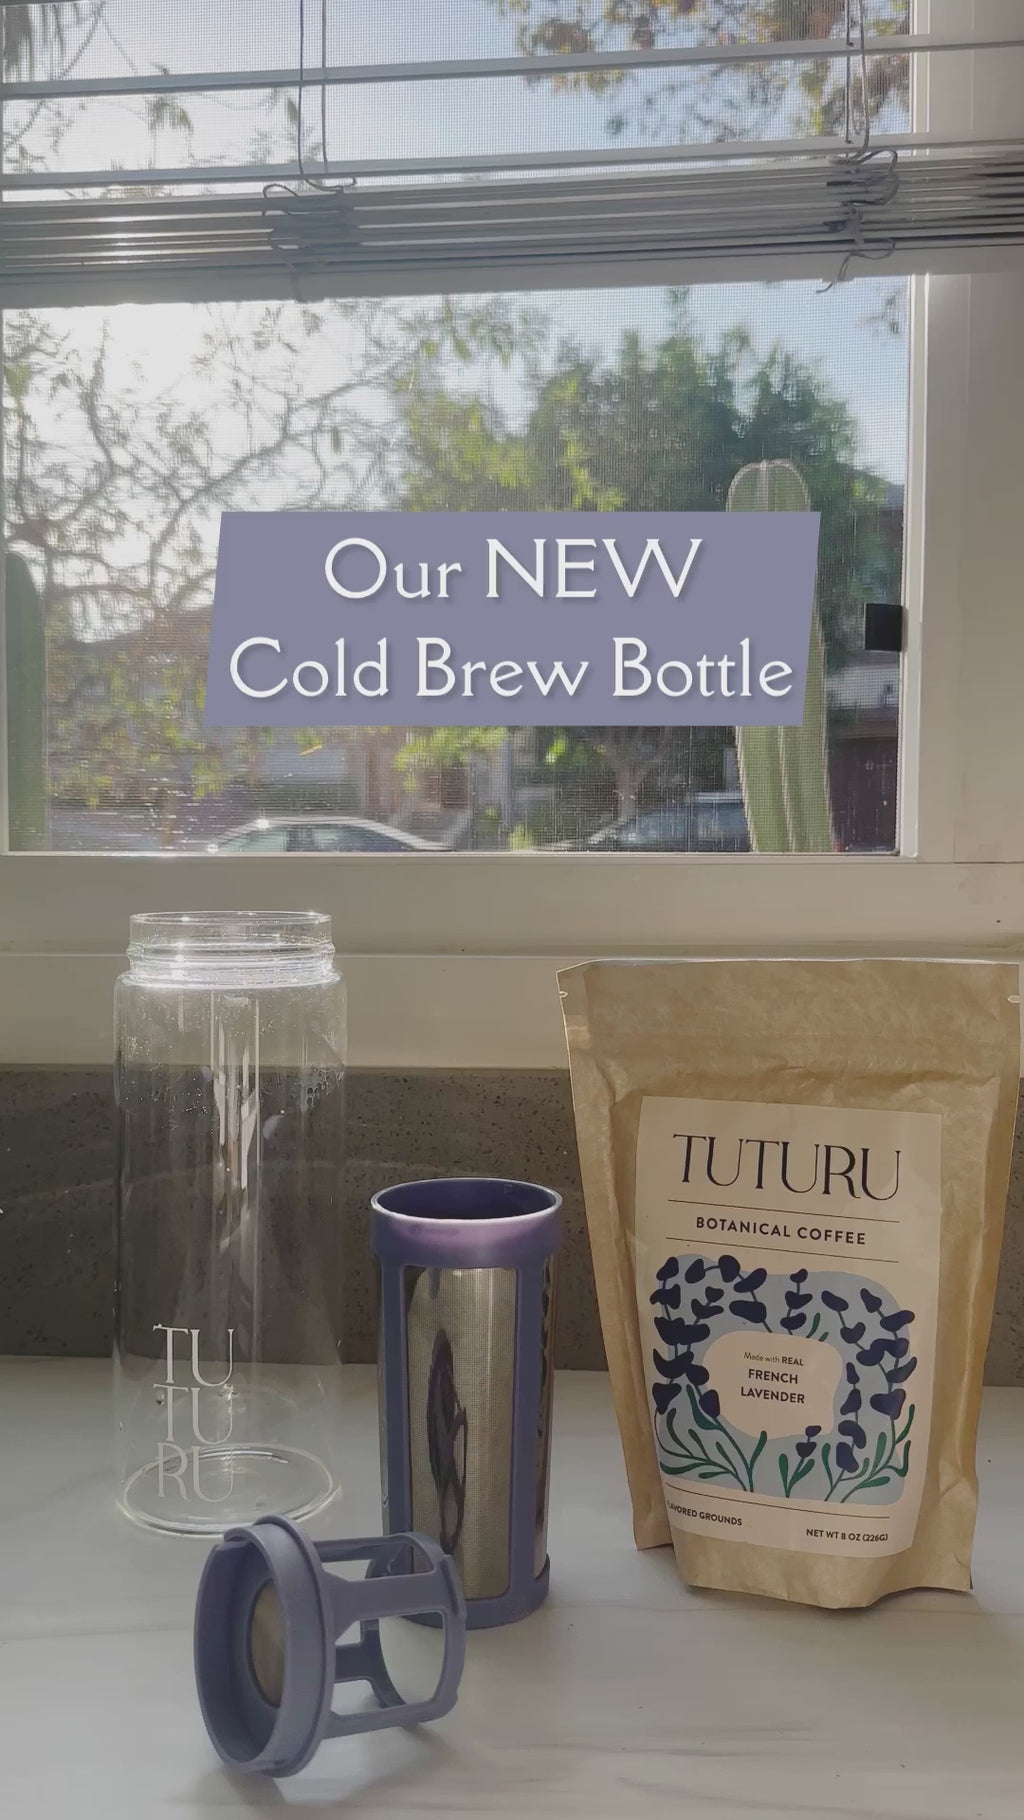 Instructions for how to use your TUTURU cold brew bottle